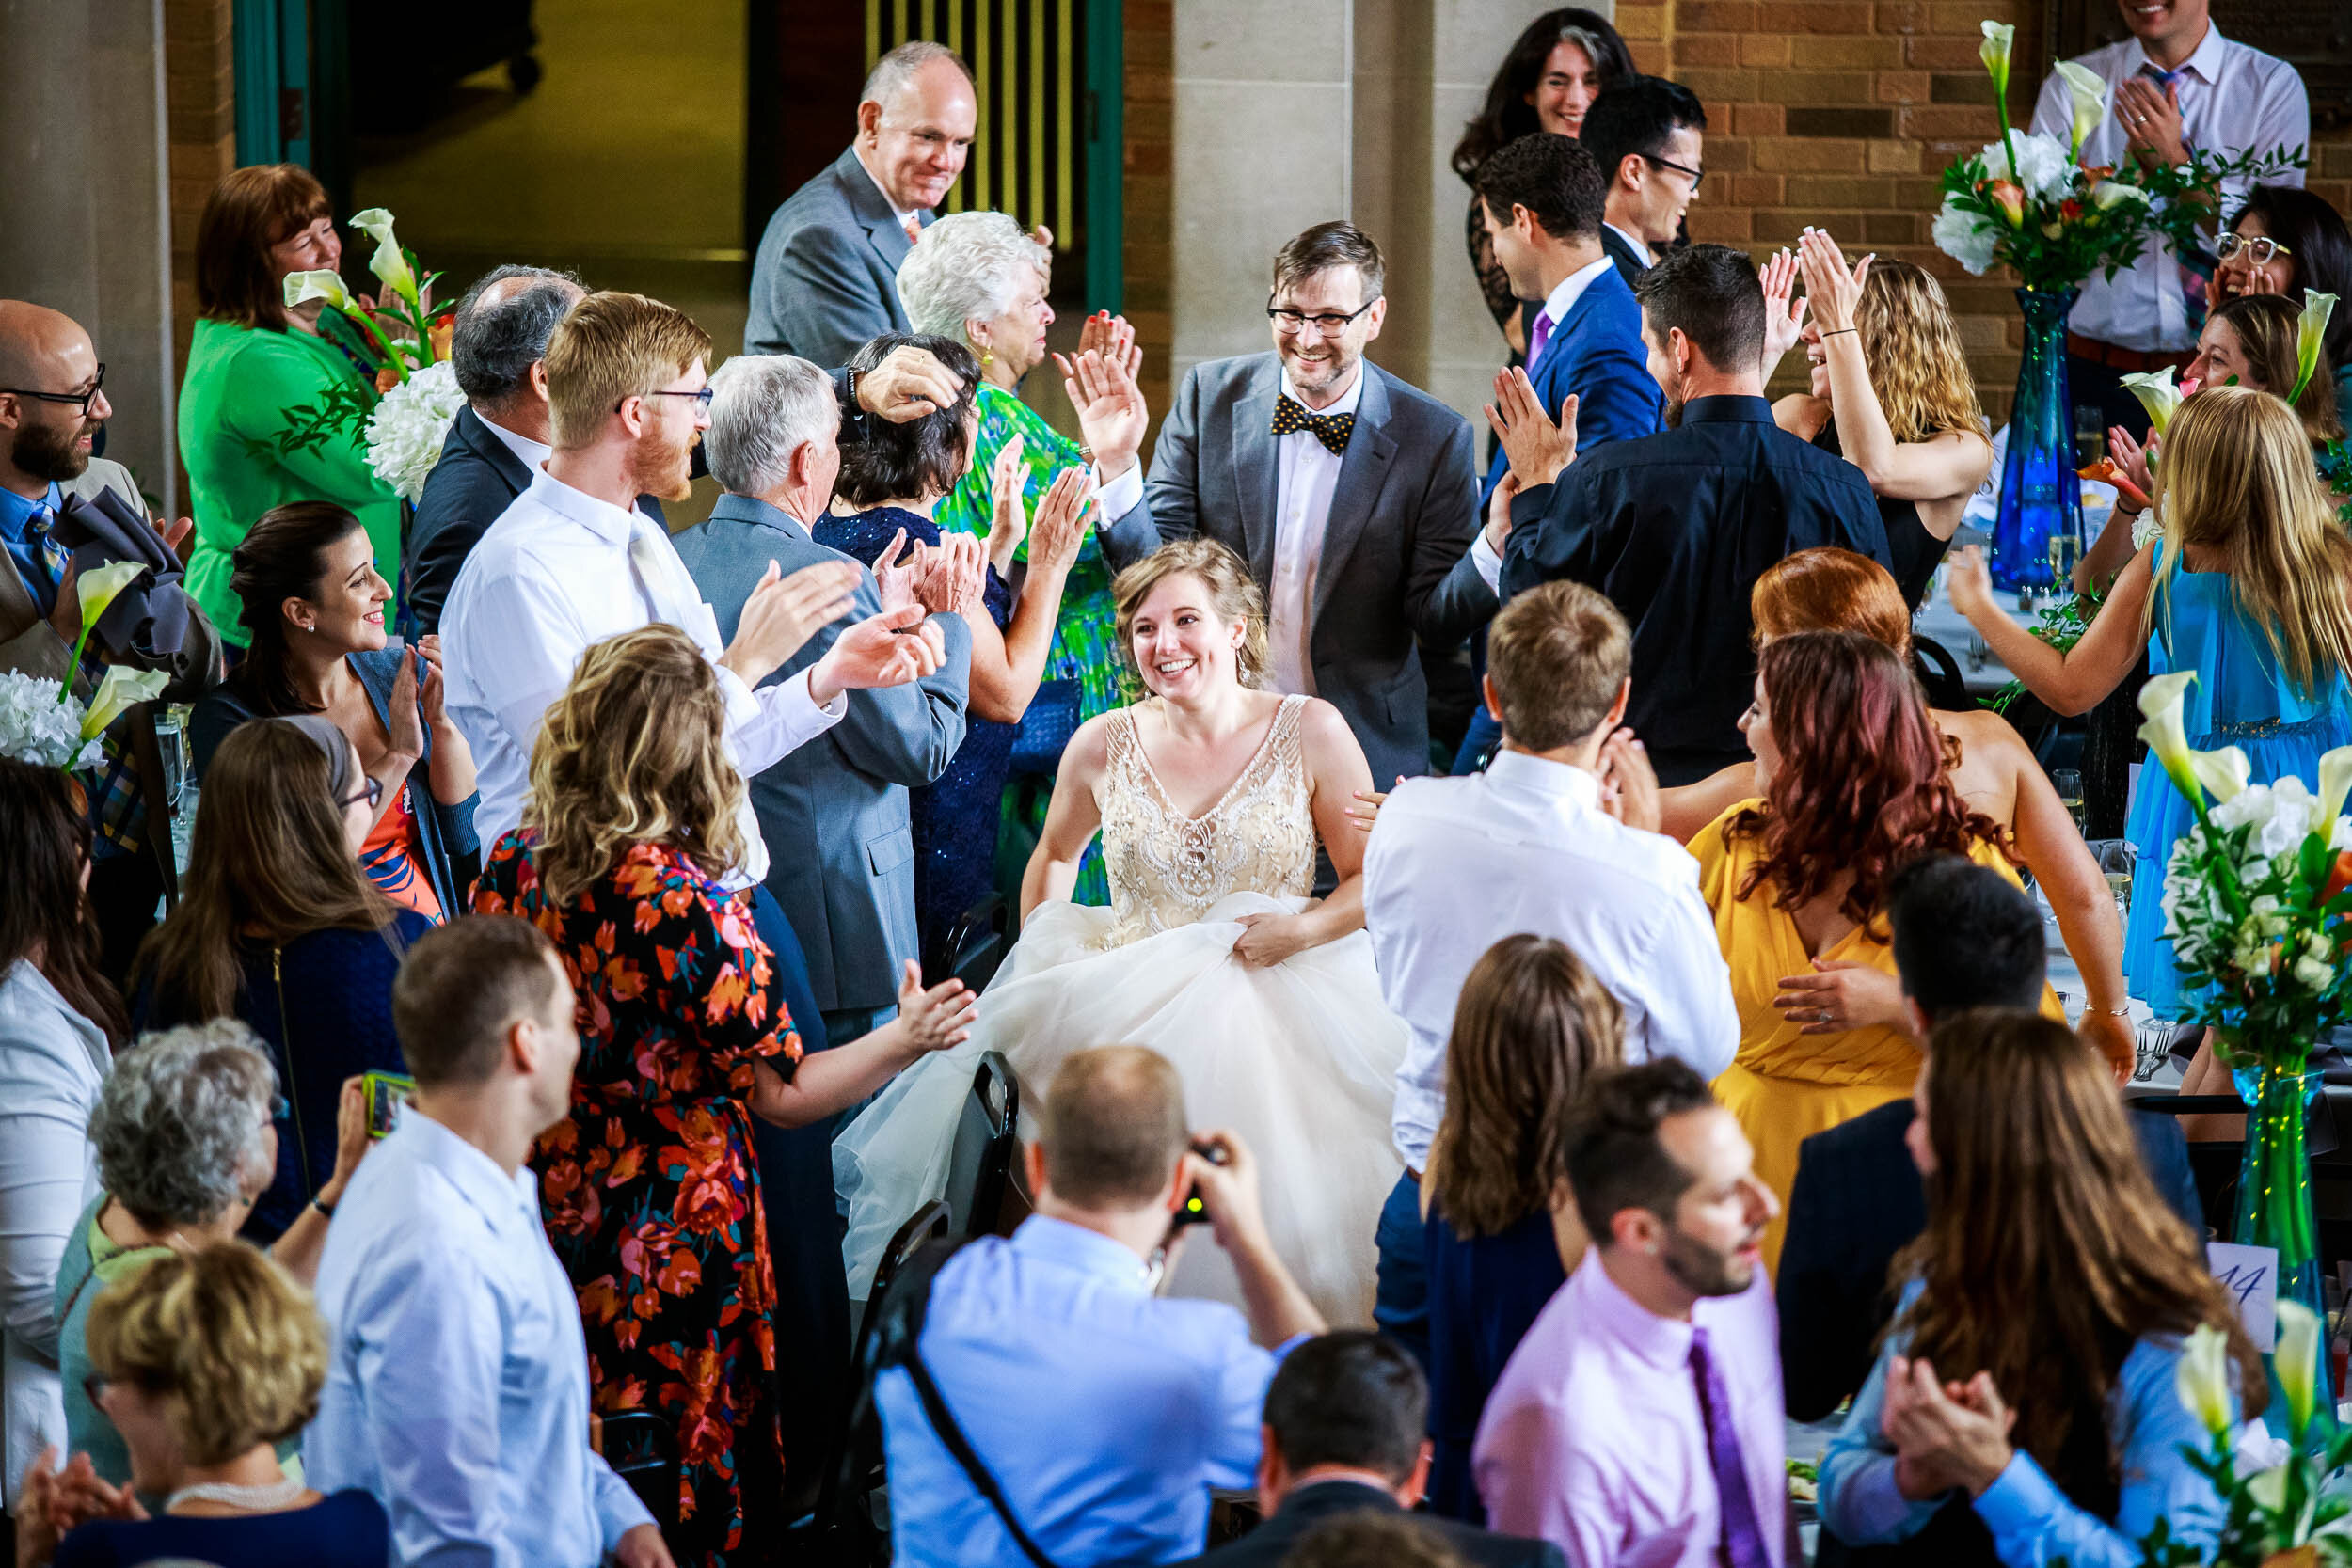 Couple introduction into their reception: Columbus Park Refectory Chicago wedding captured by J. Brown Photography.